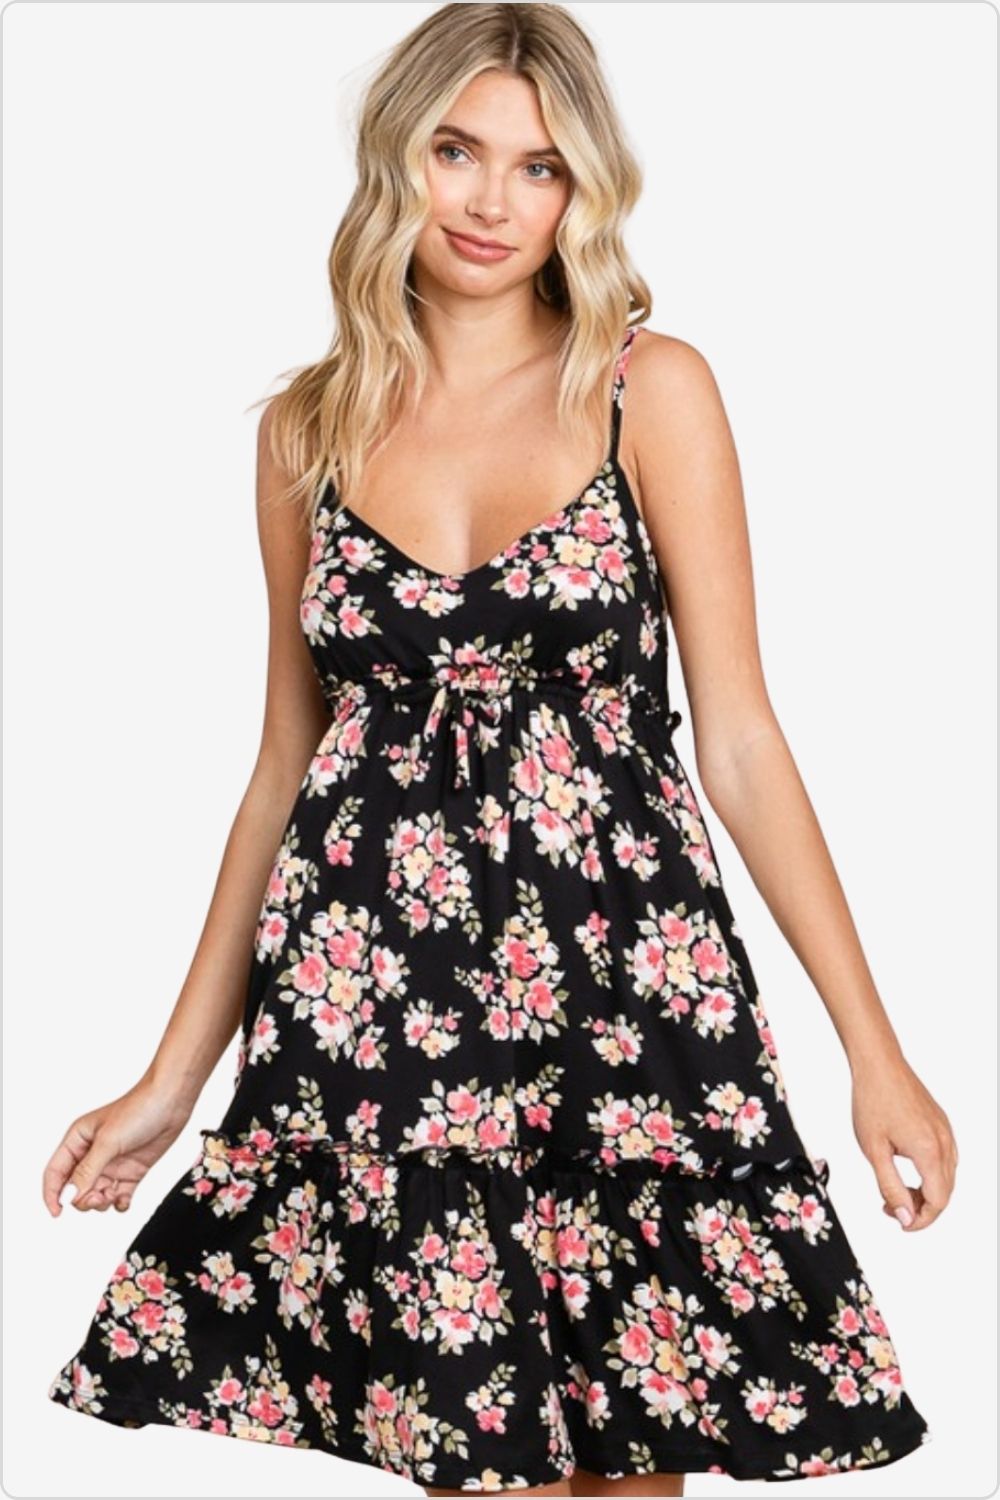 Stylish floral frill cami dress perfect for warm weather and special occasions, Color Black